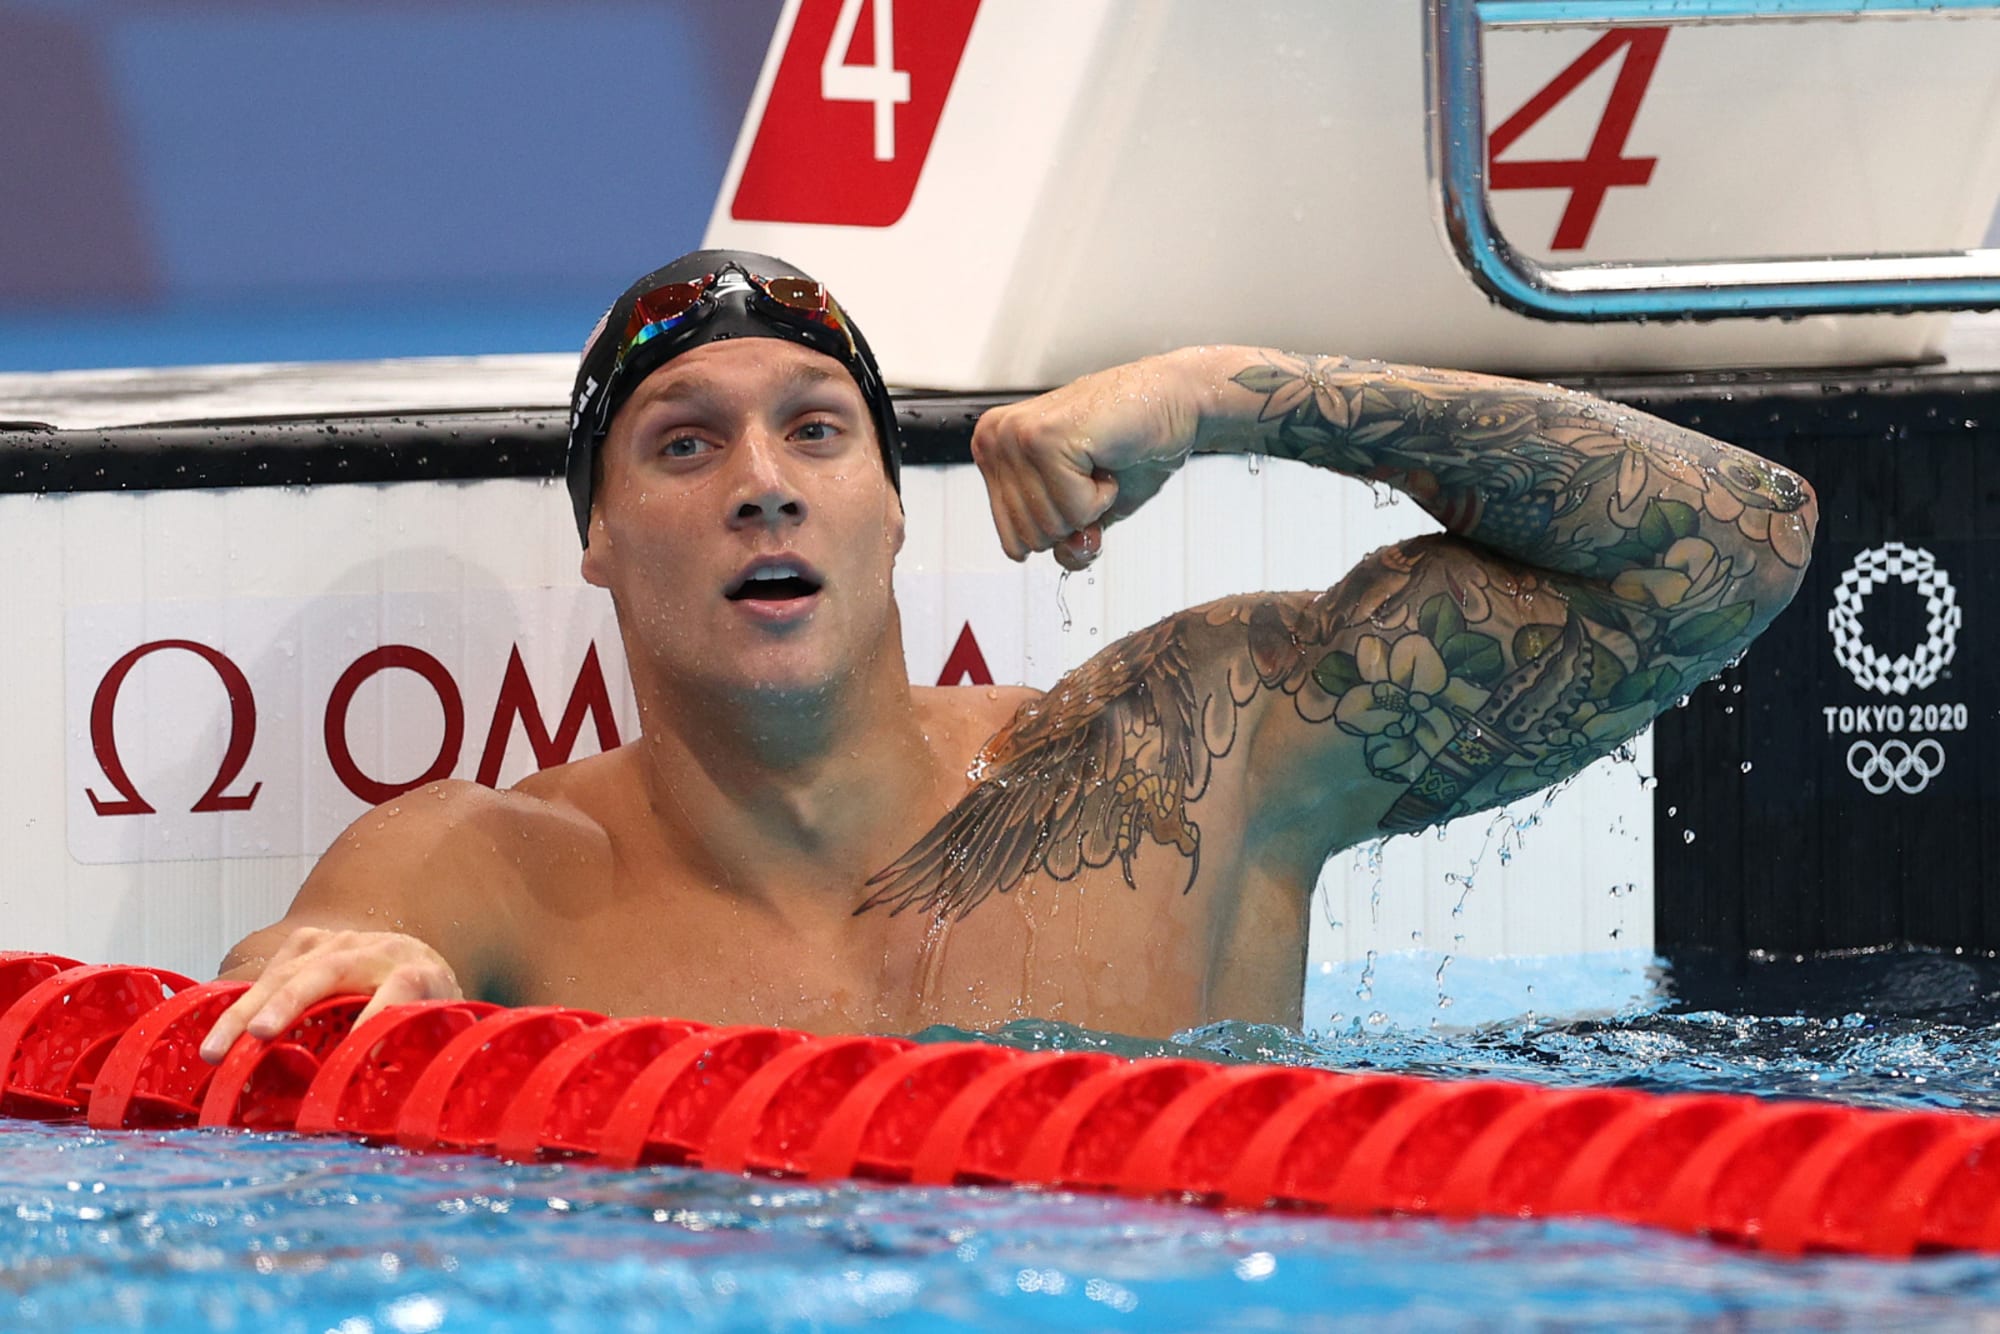 Caeleb Dressel wins gold, sets another world record in 100m butterfly